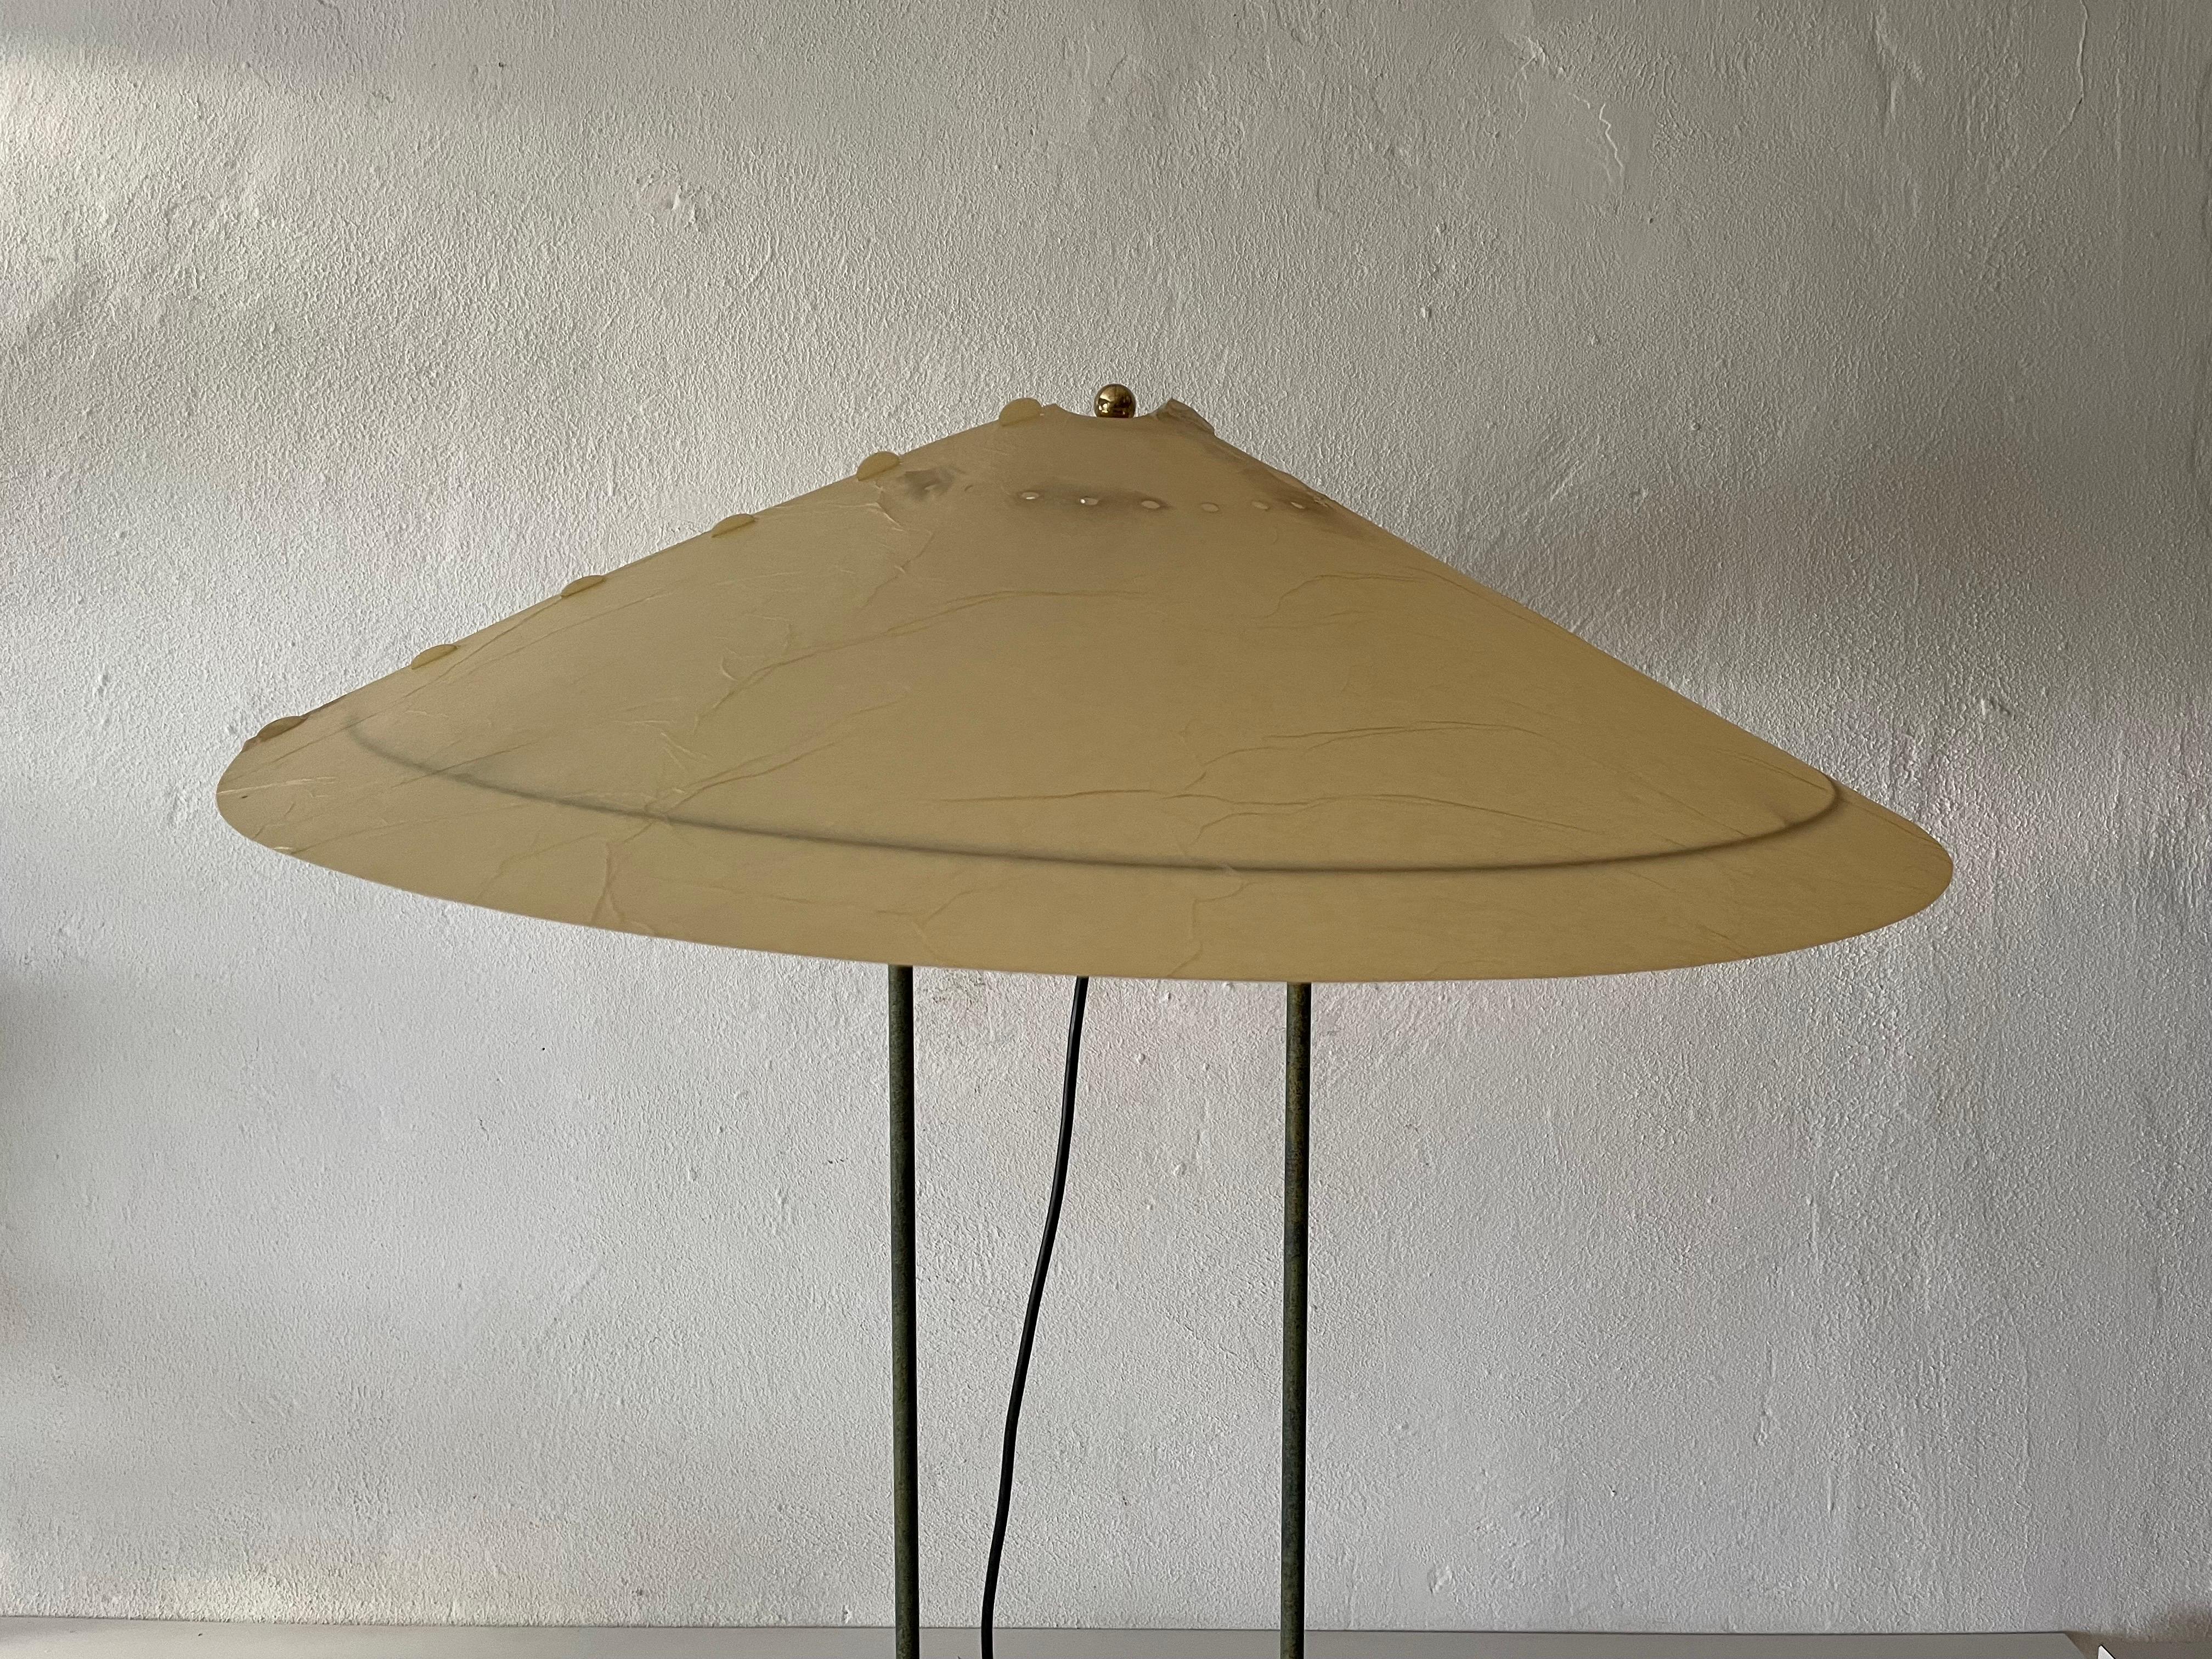 Exclusive cocoon plastic paper and green metal body industrial table lamp, 1950s Germany
 
Cocoon shades & metal body

There are some small rips on the lamp shade. You can see it in the photos

Minimal and natural design
Very high